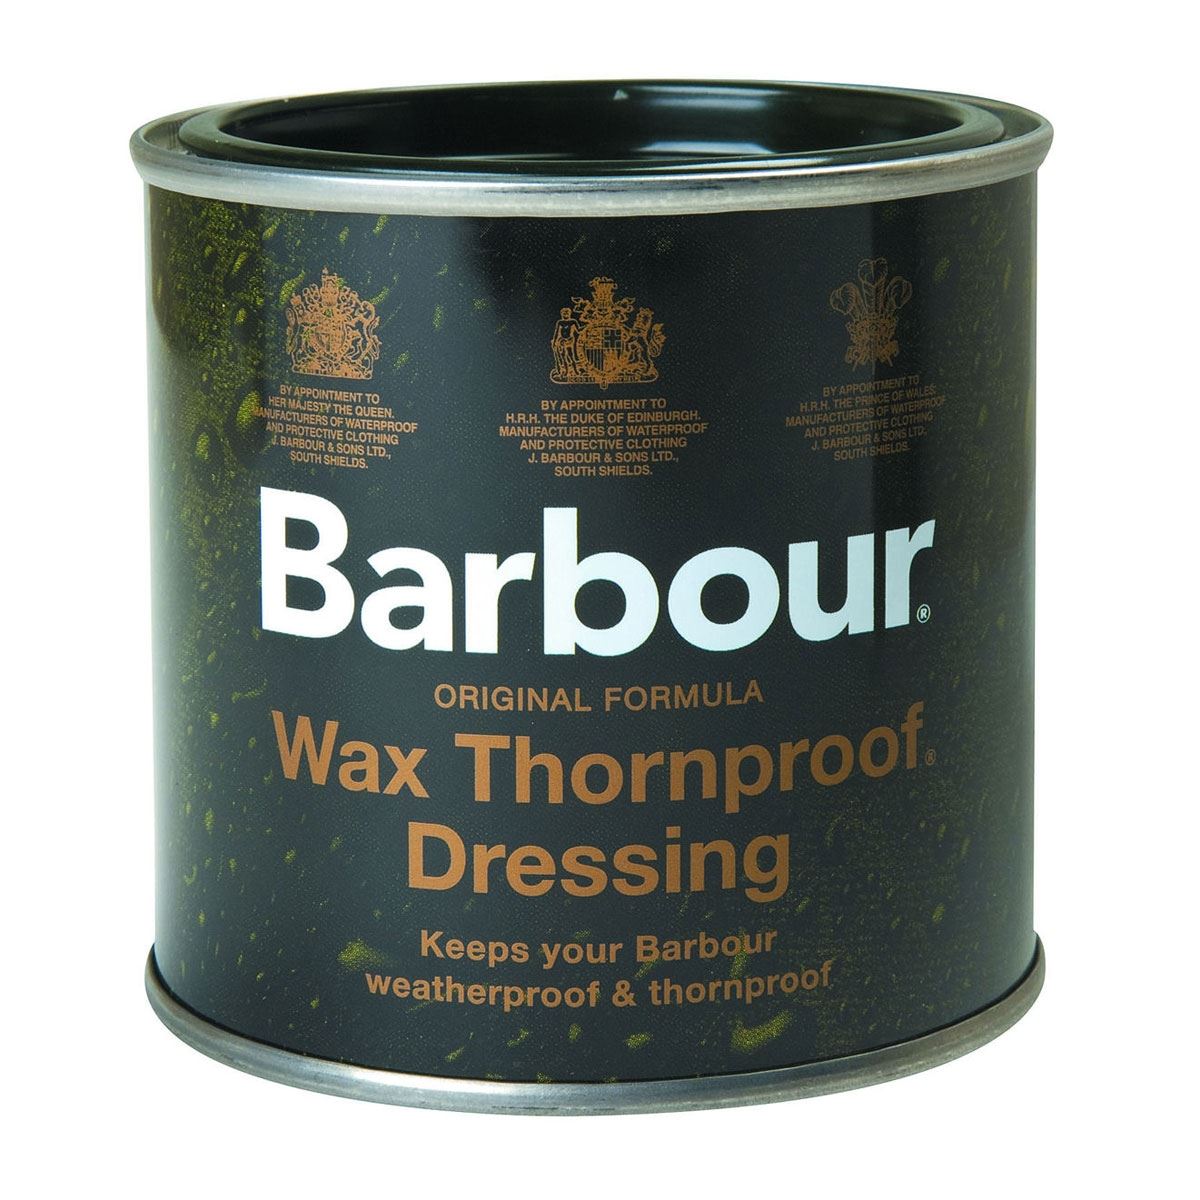 What's the composition of Barbour Wax Thornproof Dressing?